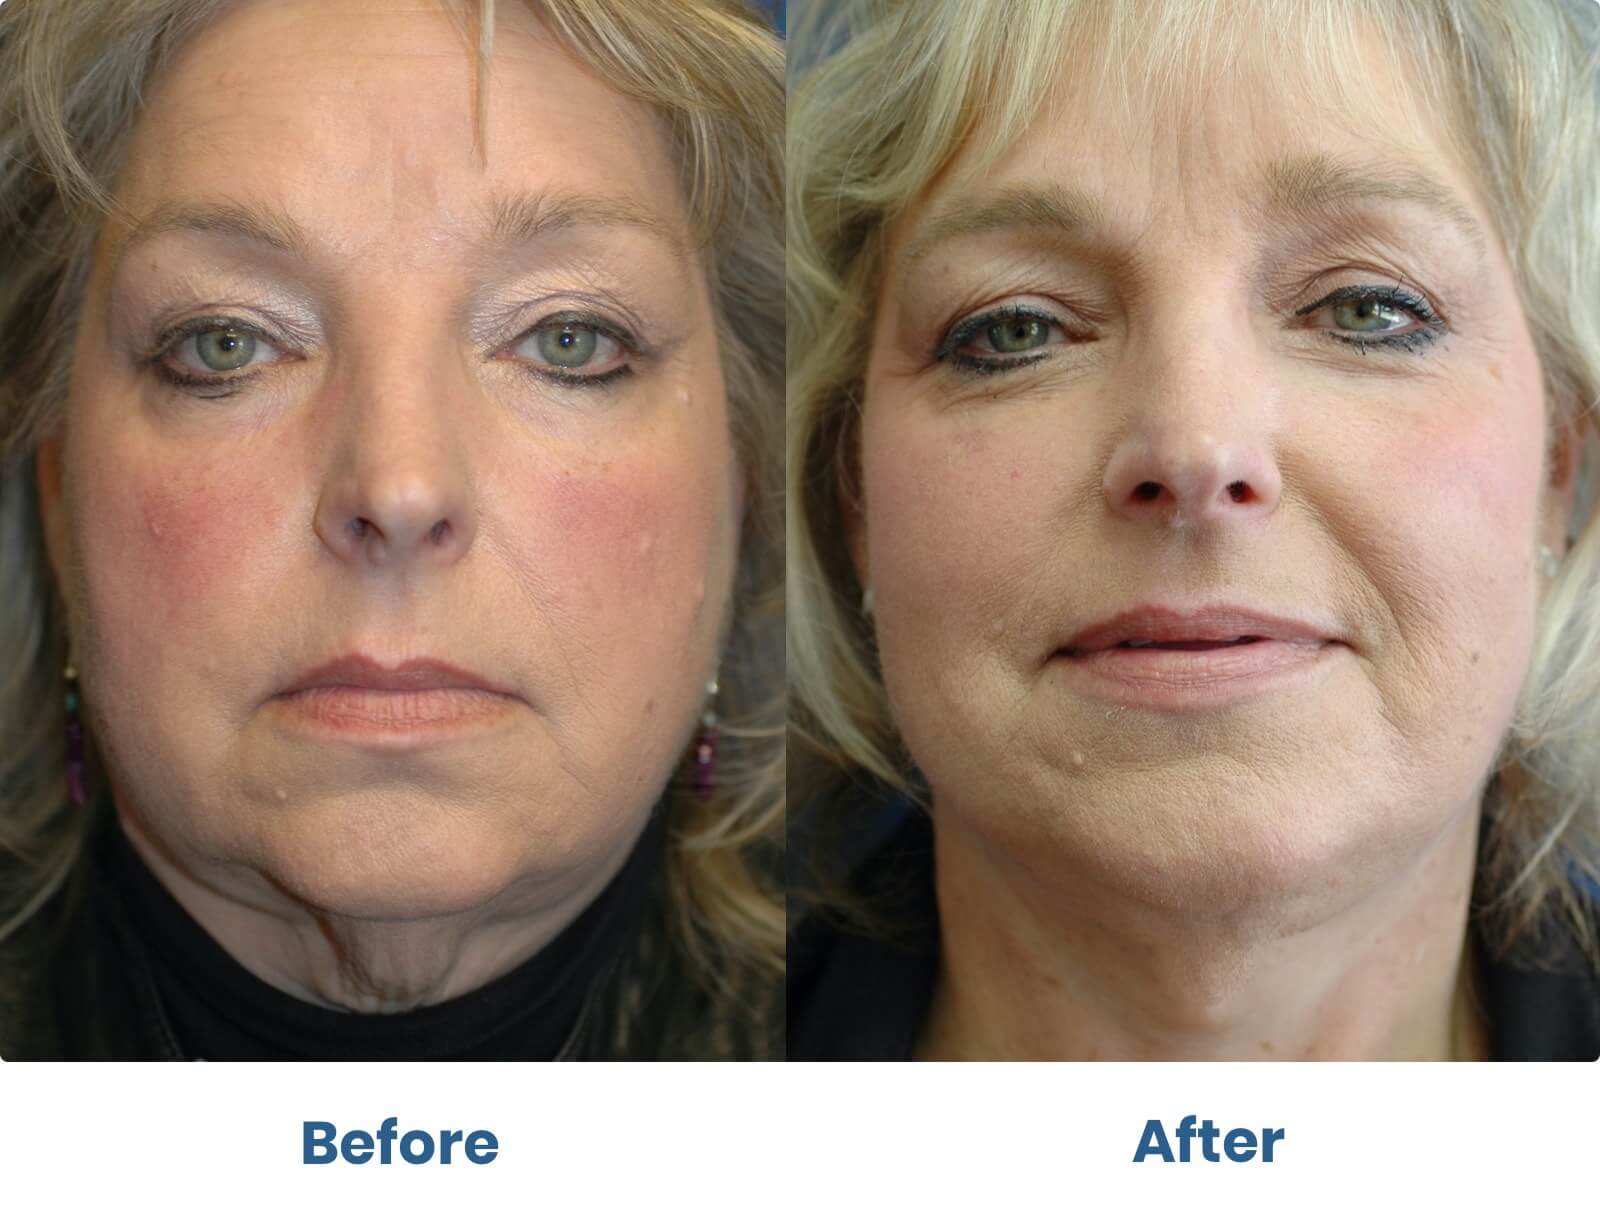 Before and after photos of facial treatments